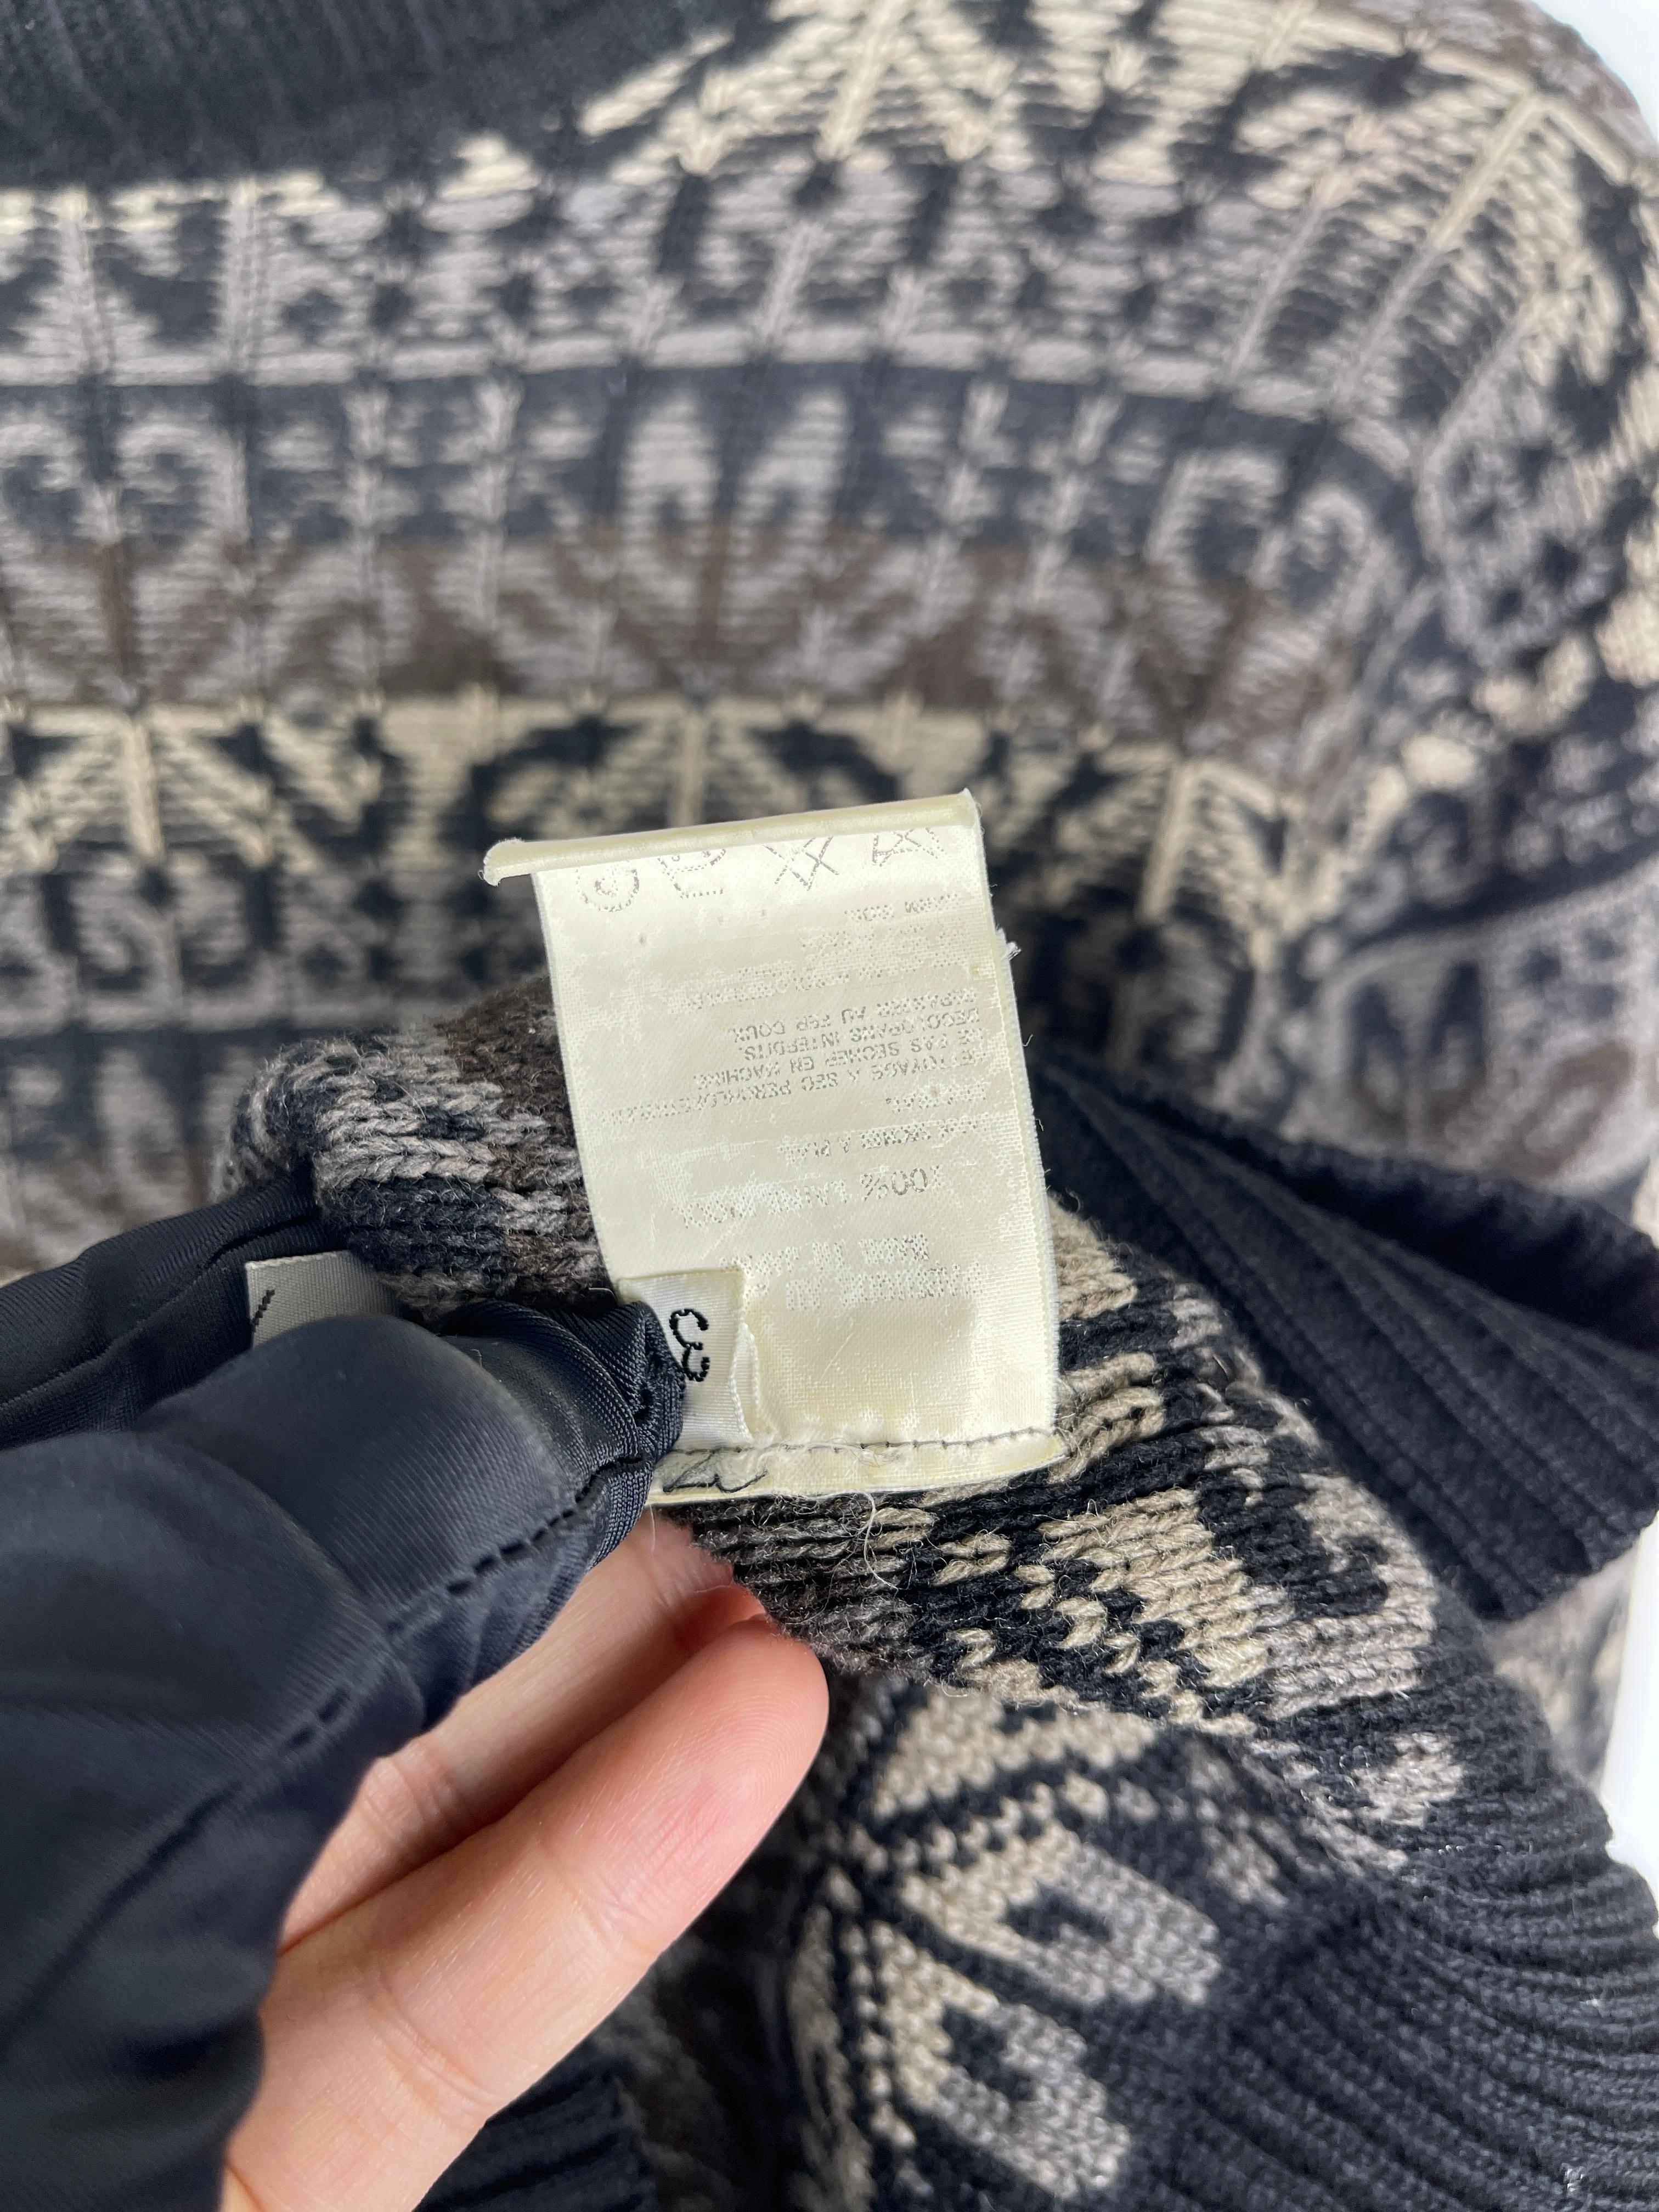 Yohji Yamamoto Pour Homme Intarsia Floral Sweater  In Excellent Condition For Sale In Seattle, WA